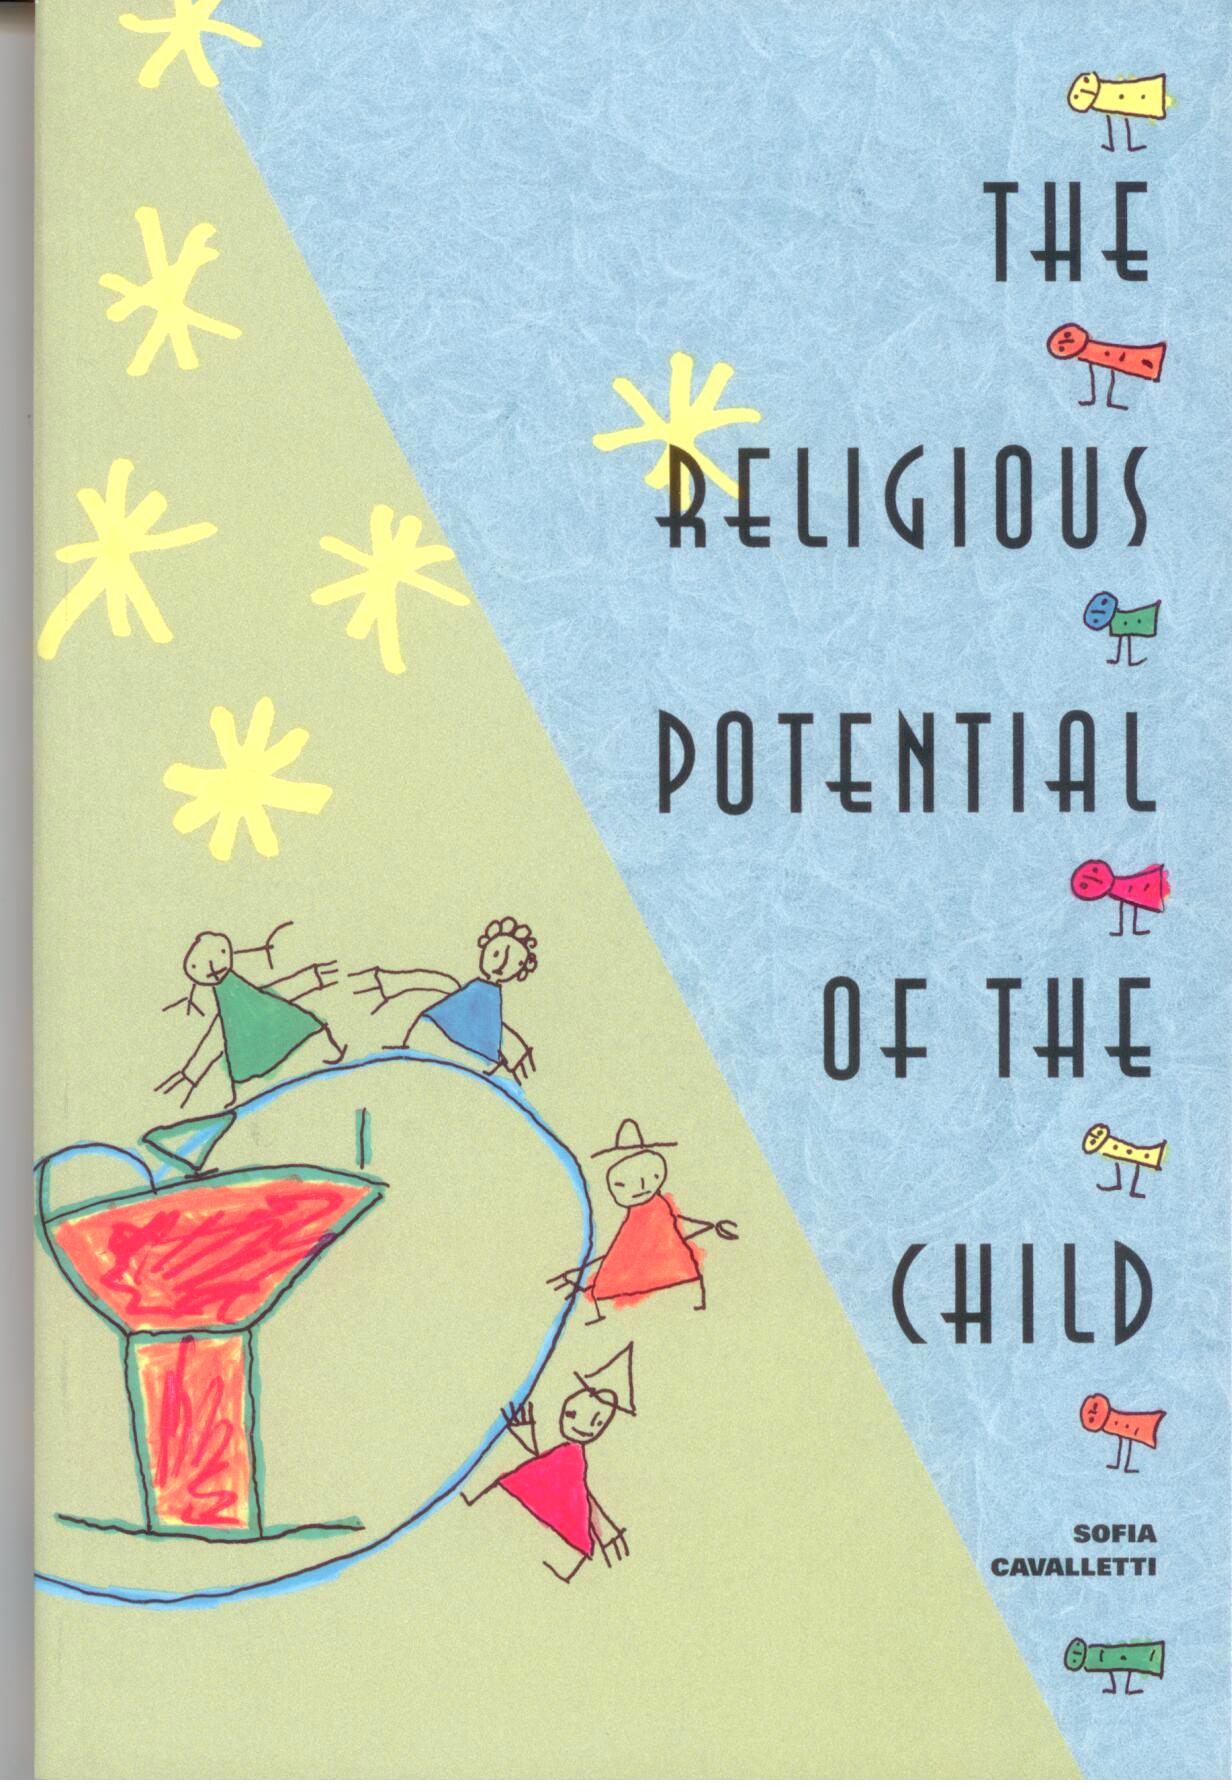 The Religious Potential of the Child by Sofia Cavalletti